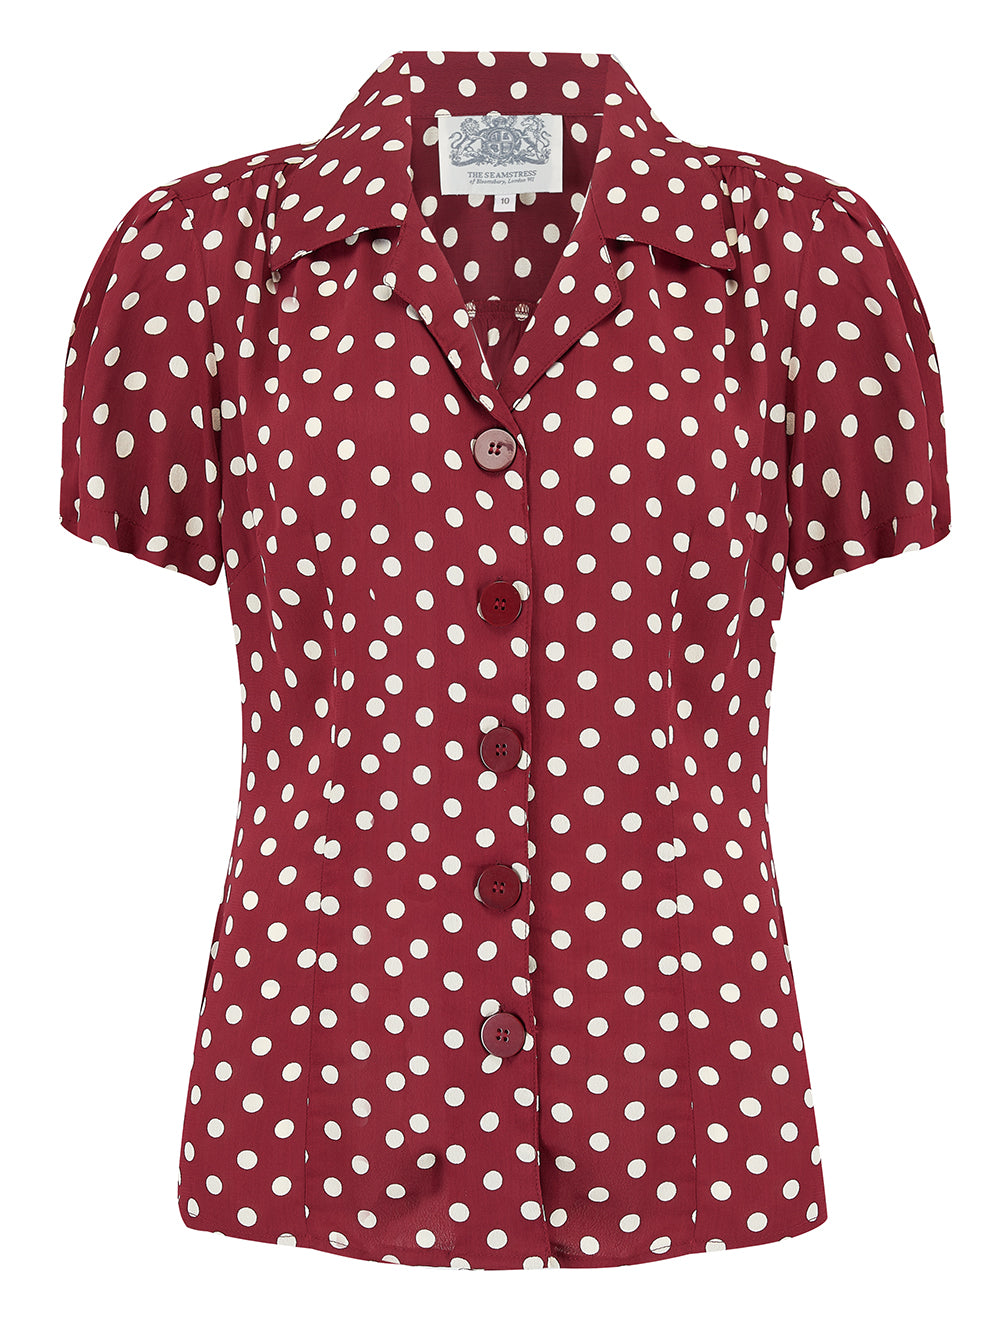 "Grace" Blouse in Wine Polkadot , Authentic & Classic 1940s Vintage Style - True and authentic vintage style clothing, inspired by the Classic styles of CC41 , WW2 and the fun 1950s RocknRoll era, for everyday wear plus events like Goodwood Revival, Twinwood Festival and Viva Las Vegas Rockabilly Weekend Rock n Romance The Seamstress Of Bloomsbury